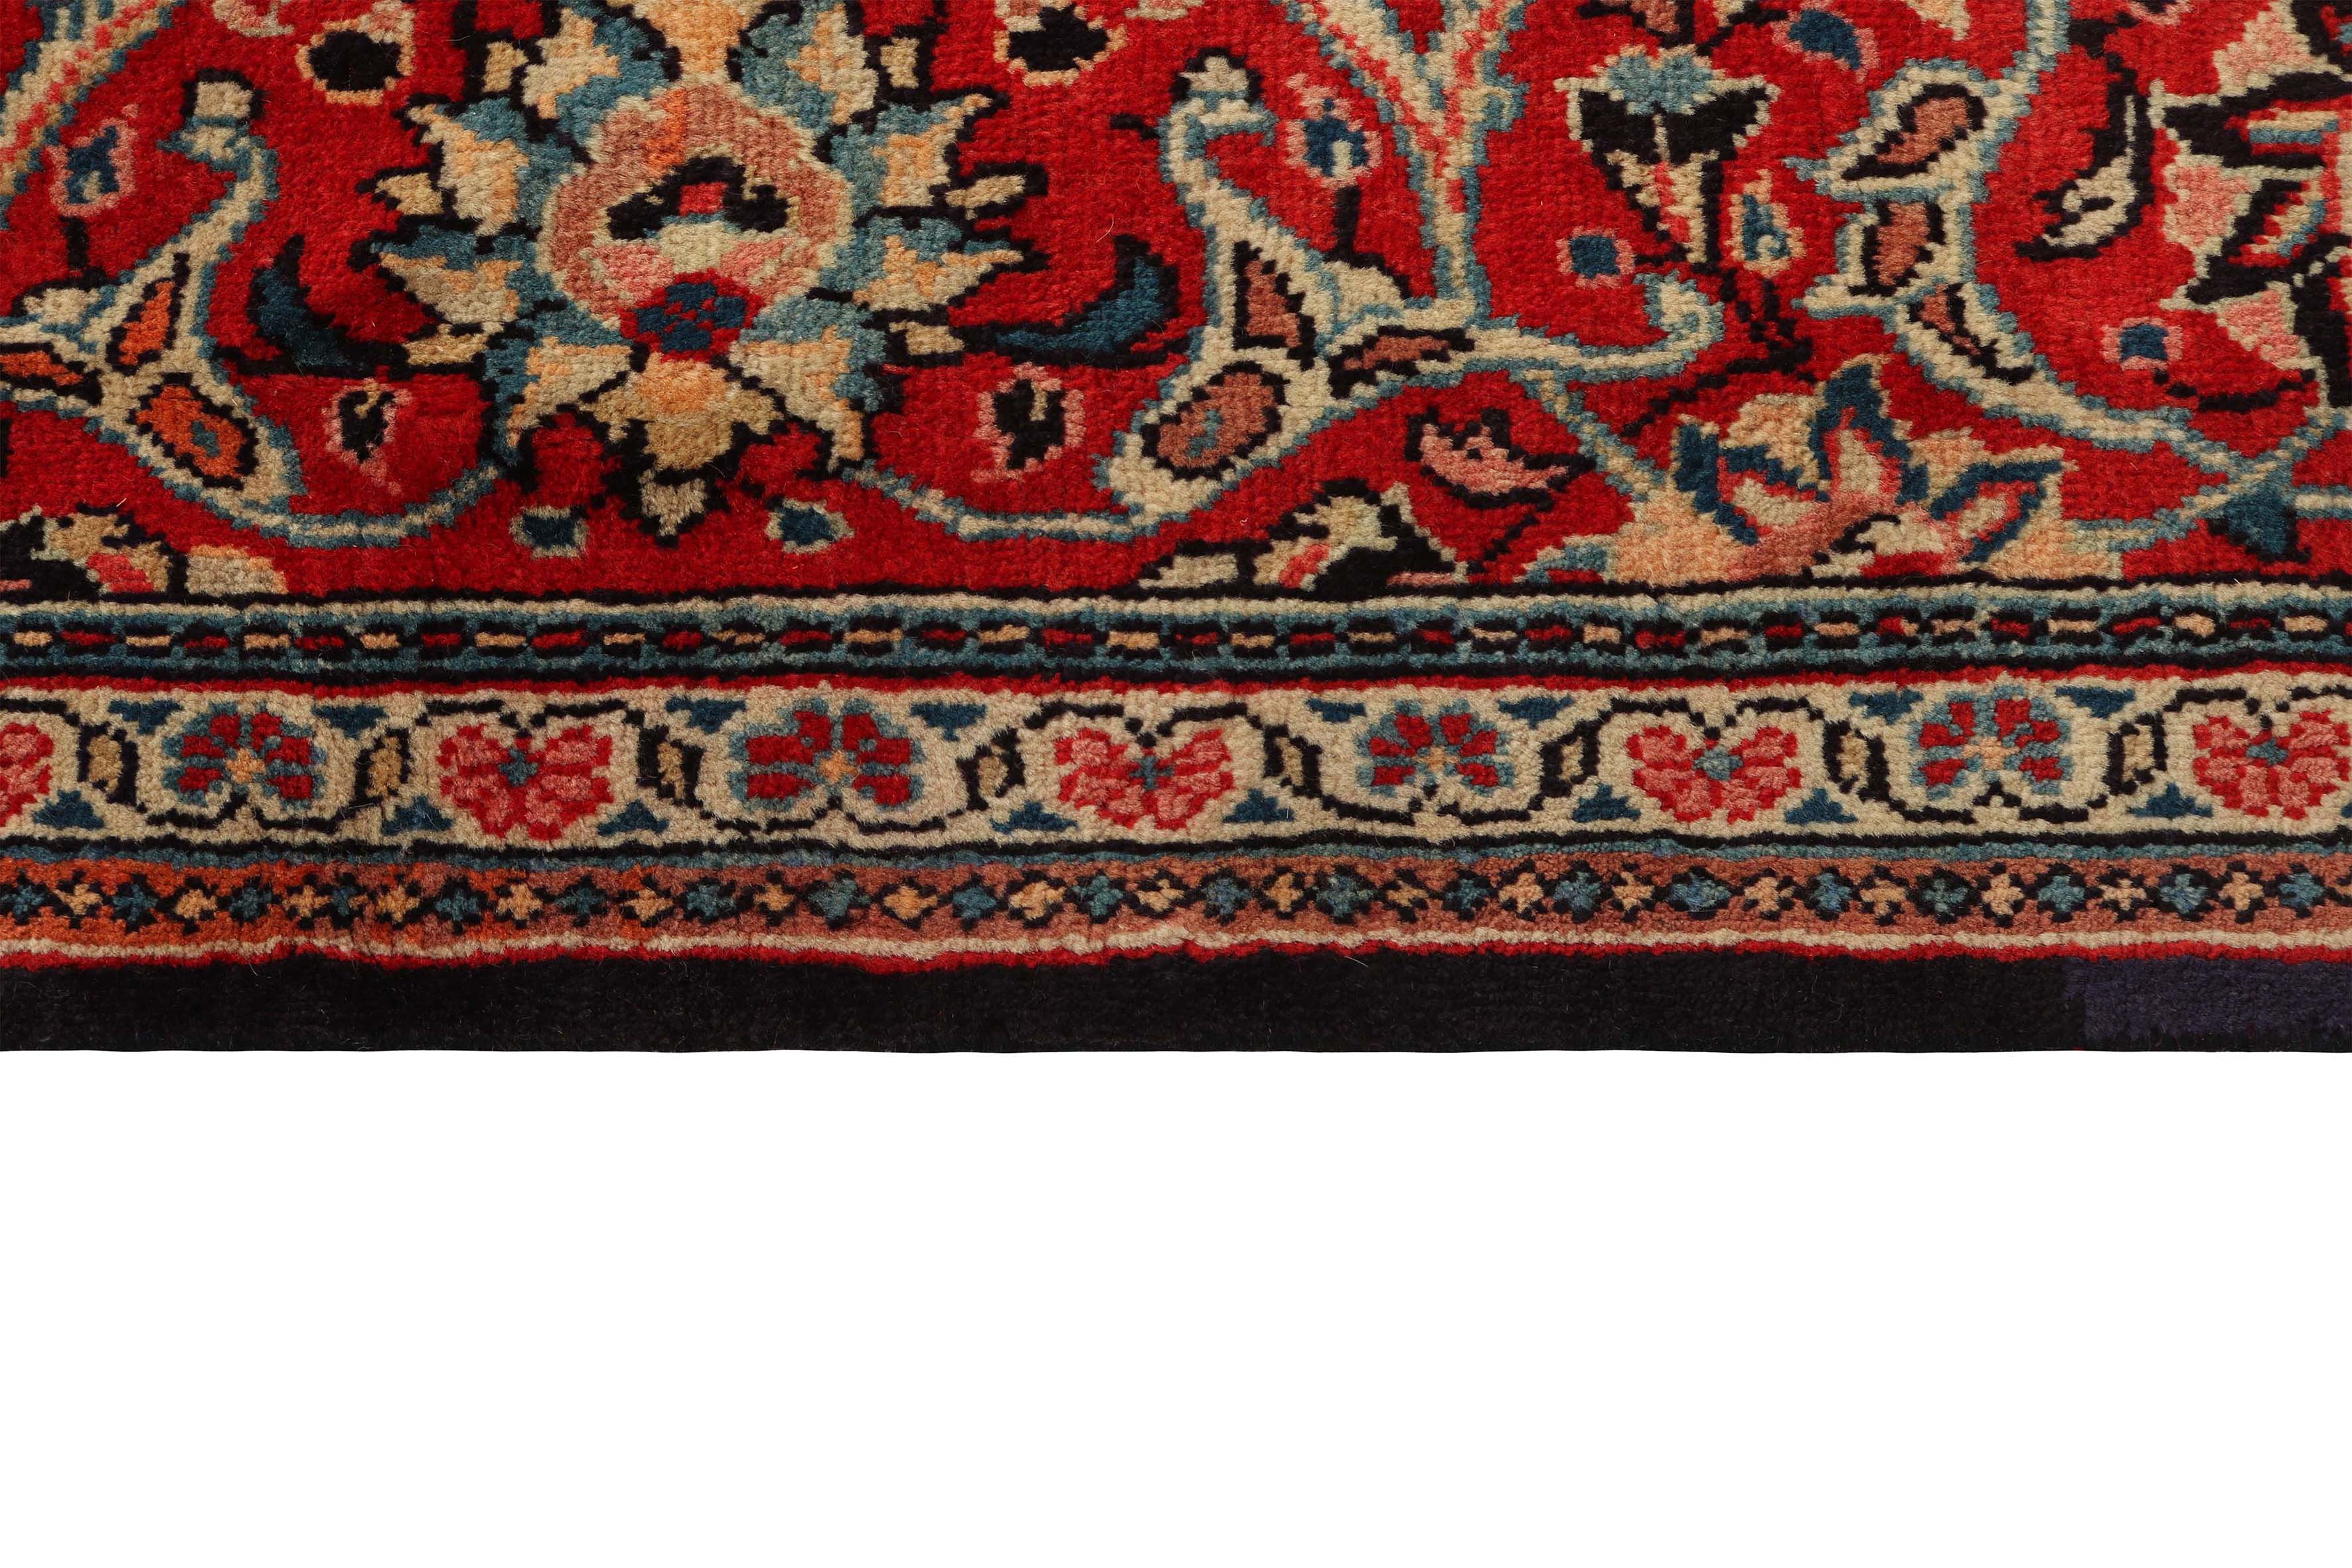 Large authentic persian rug with traditional floral pattern in red